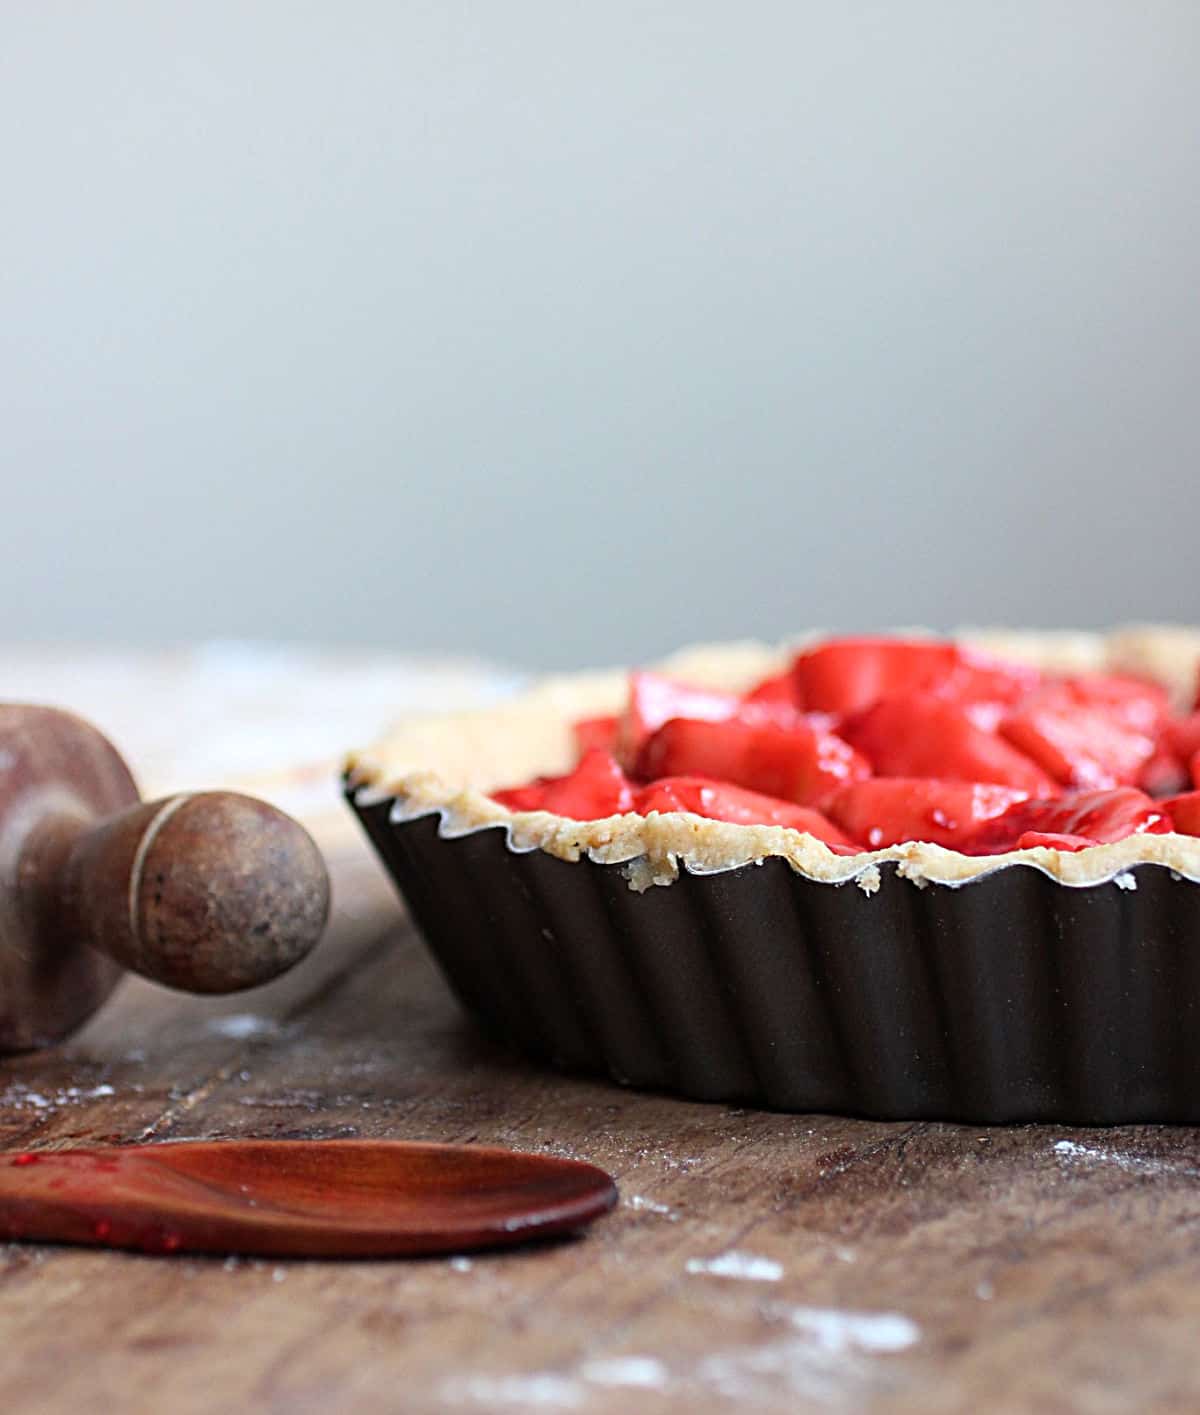 Metal pie pan with red filling on wooden table, rolling pin and wooden spoon.